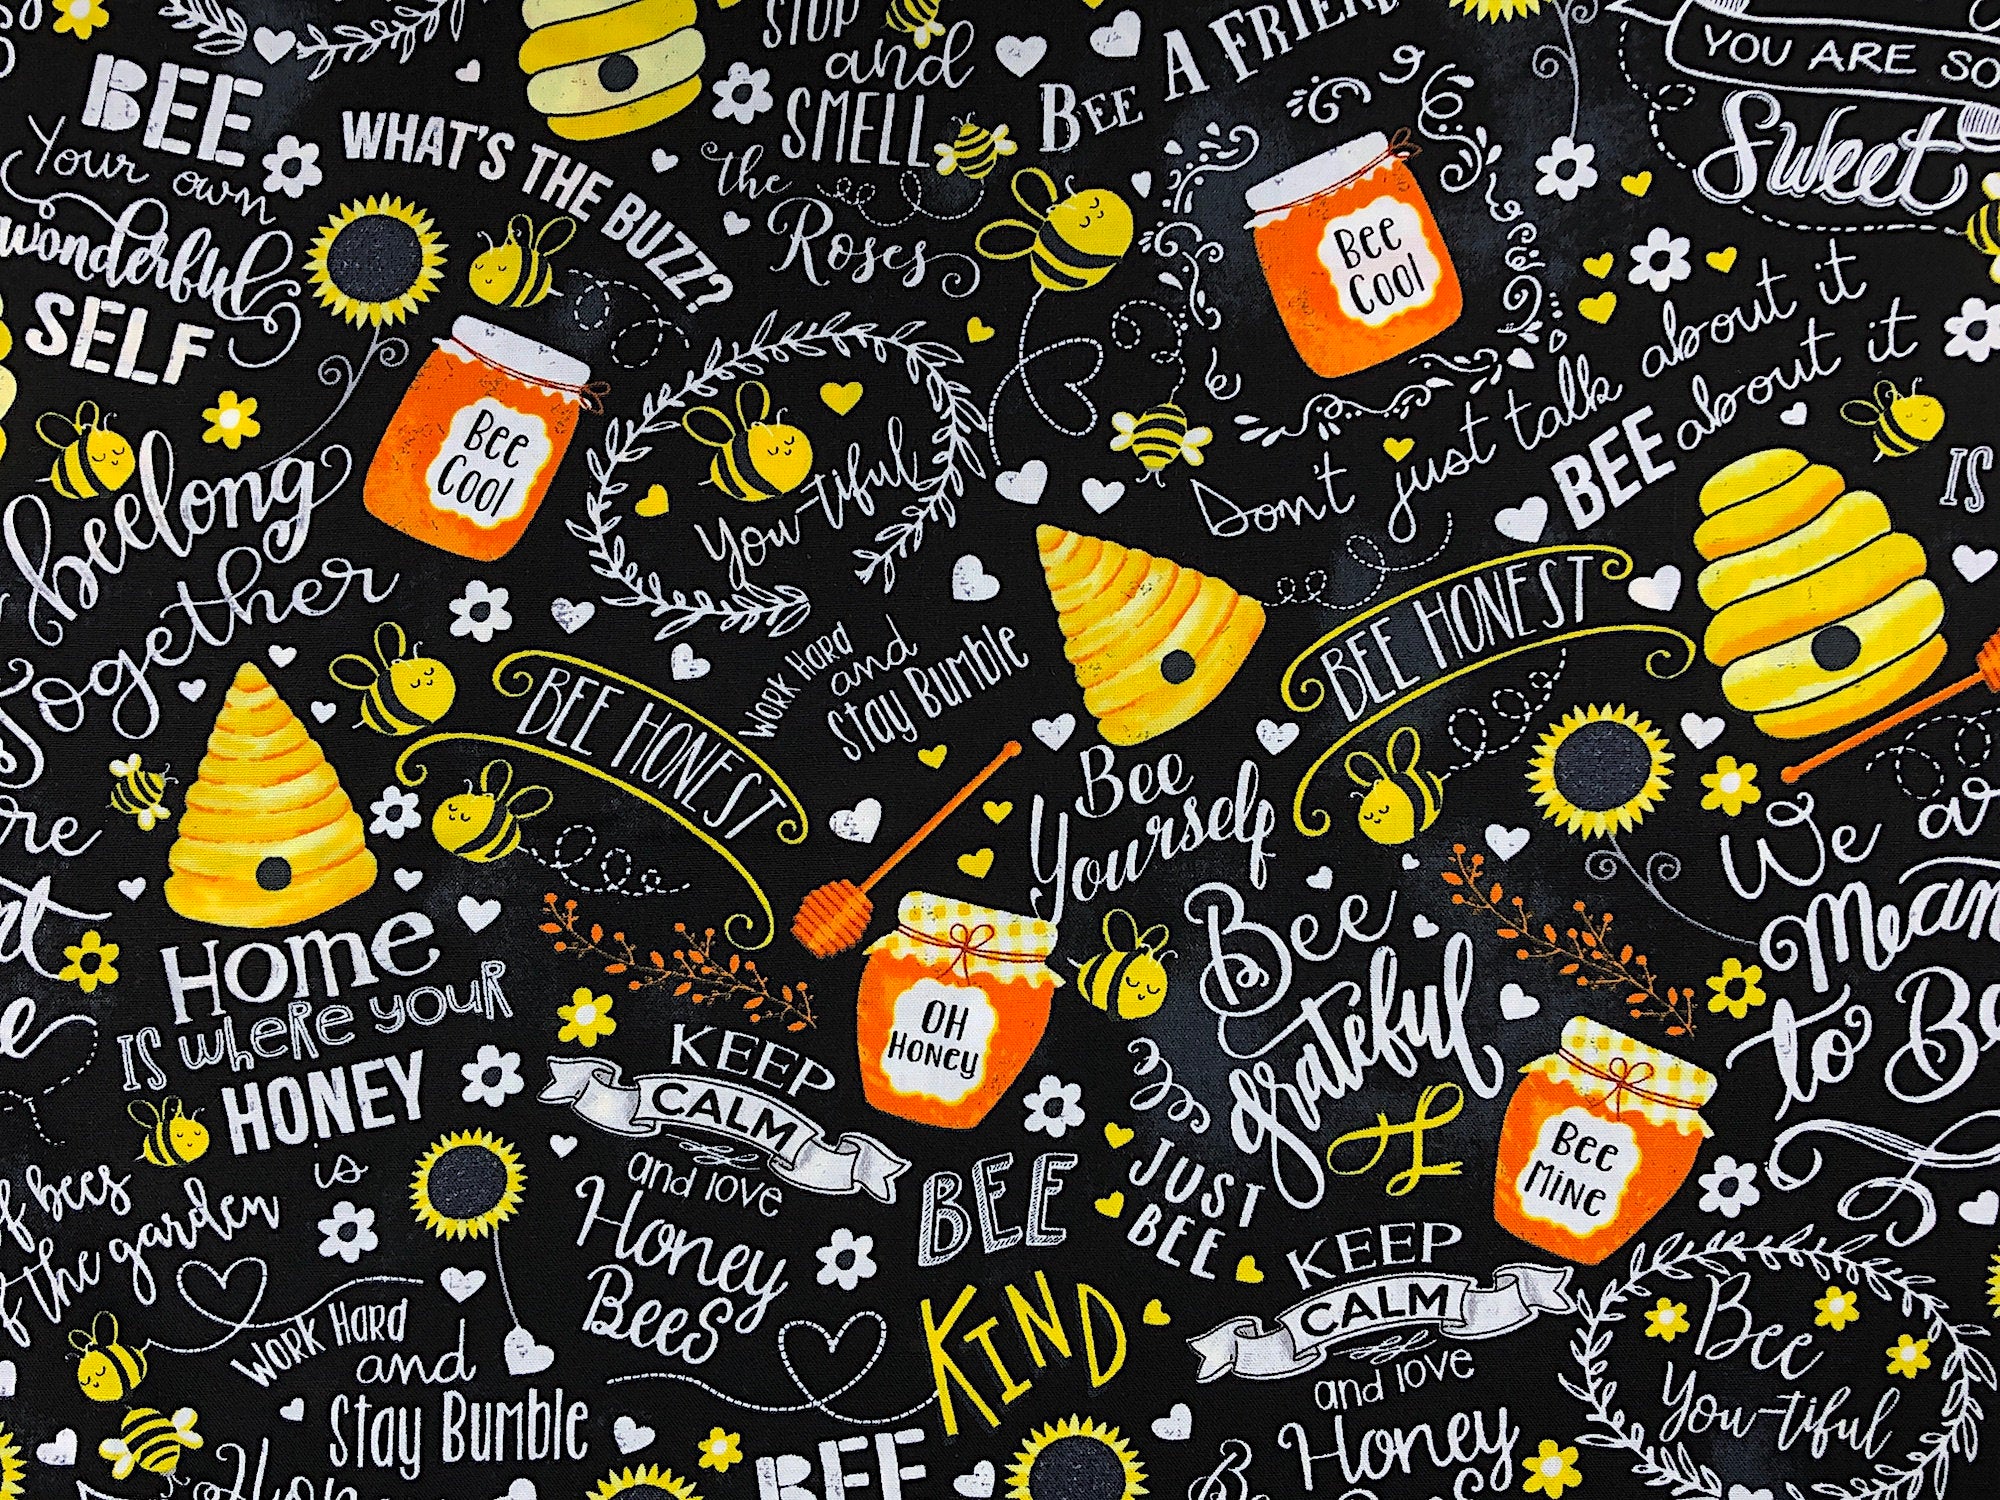 This fabric is a called Busy Bees Chalk Words. It is covered with bees, hives and jars of honey. It also has sayings such as Bee your own wonderful self, we belong together, bee honest, be yourself and more. The background is black